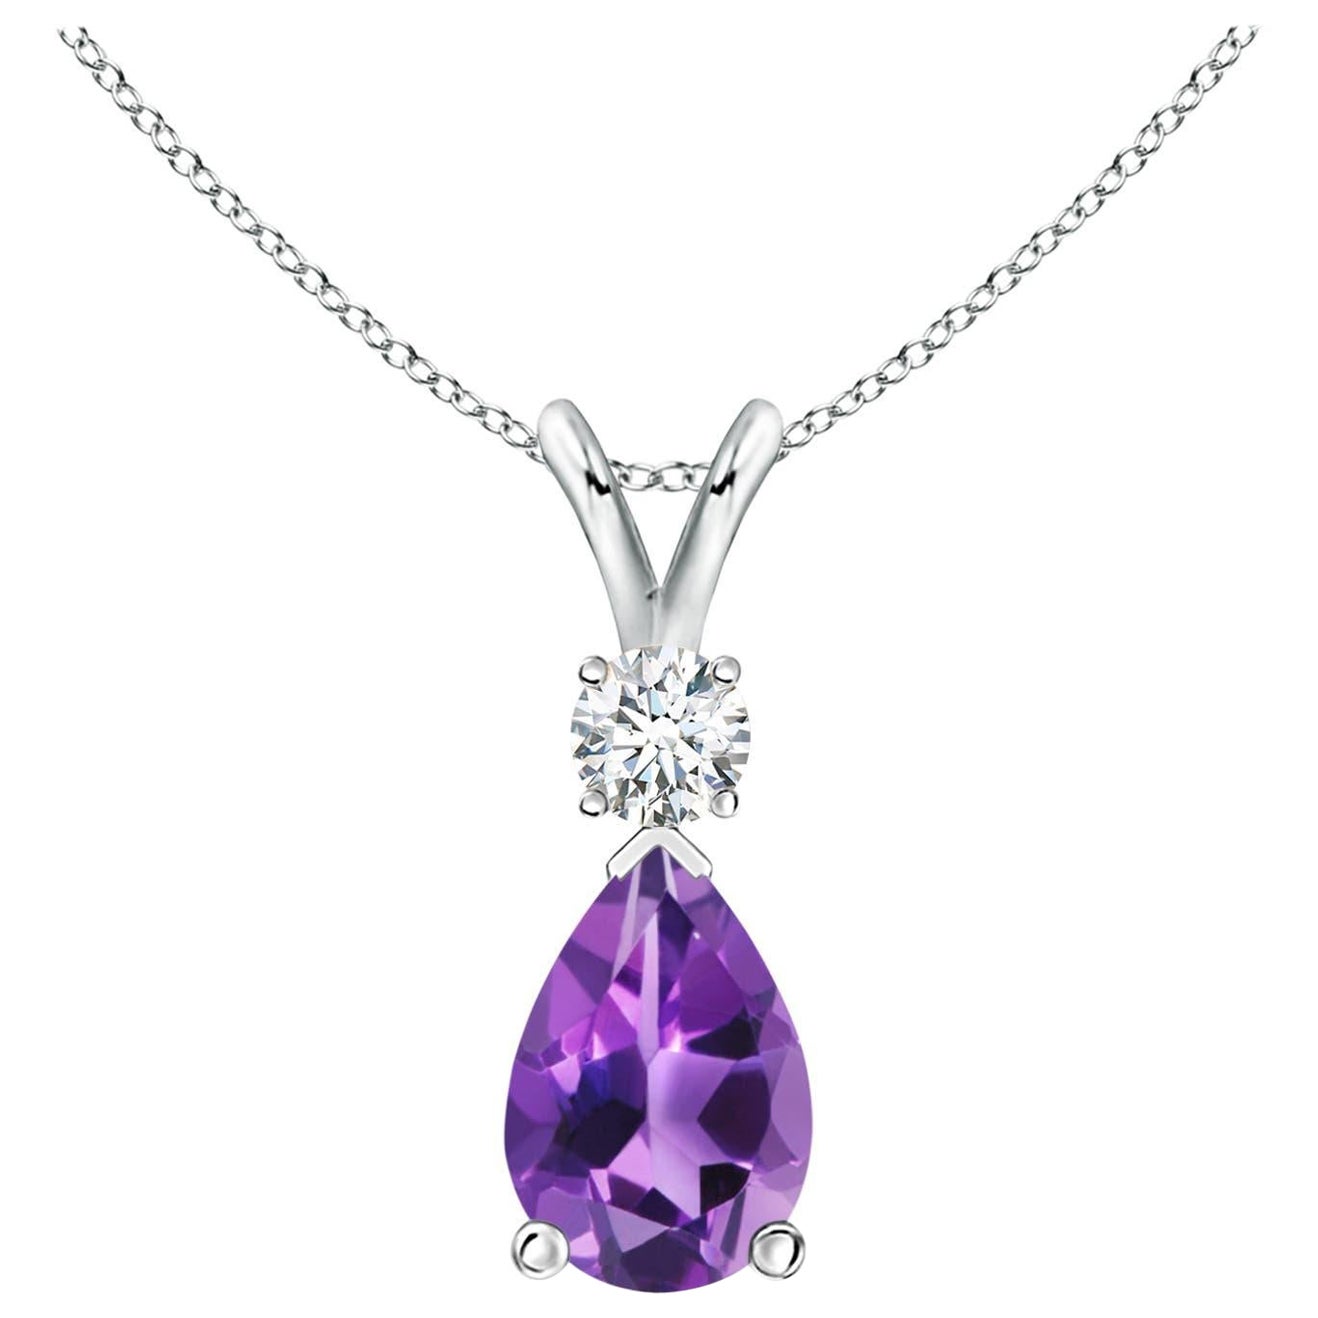 Natural 1.6 ct Amethyst Teardrop Pendant with Diamond in 14K White Gold